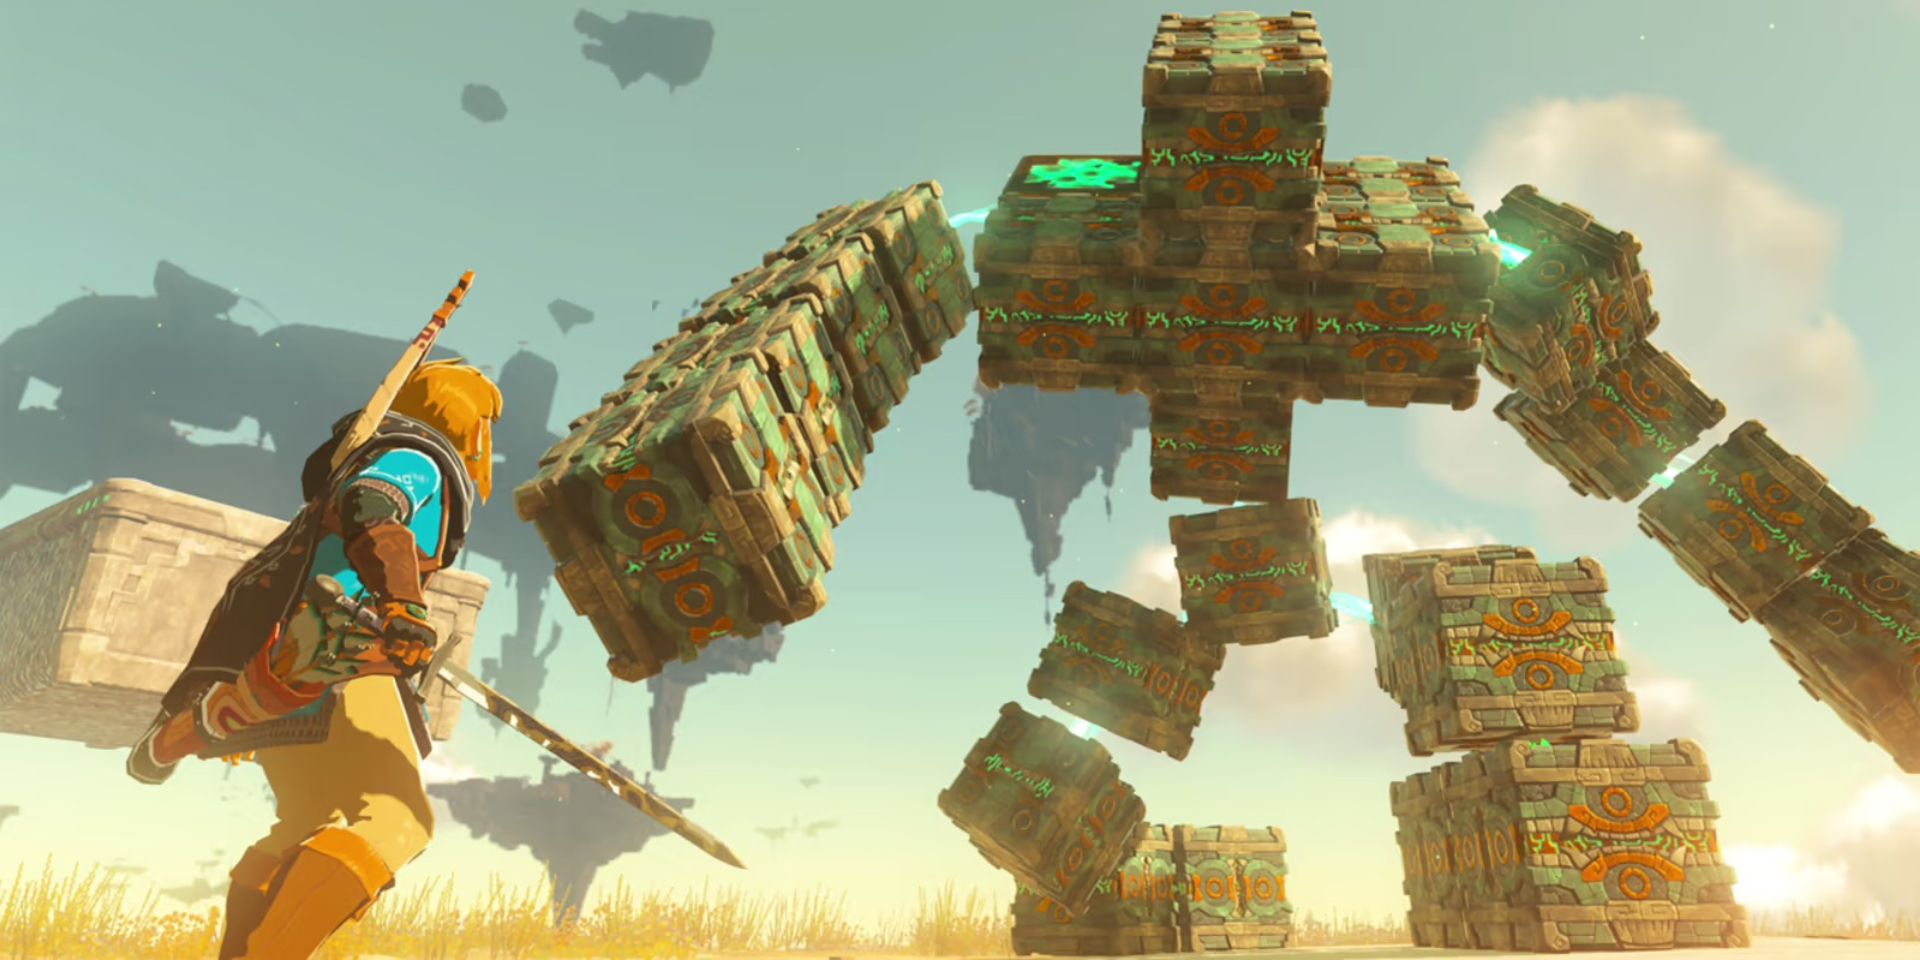 A robot enemy in Tears of the Kingdom that looks like a stack of boxes.